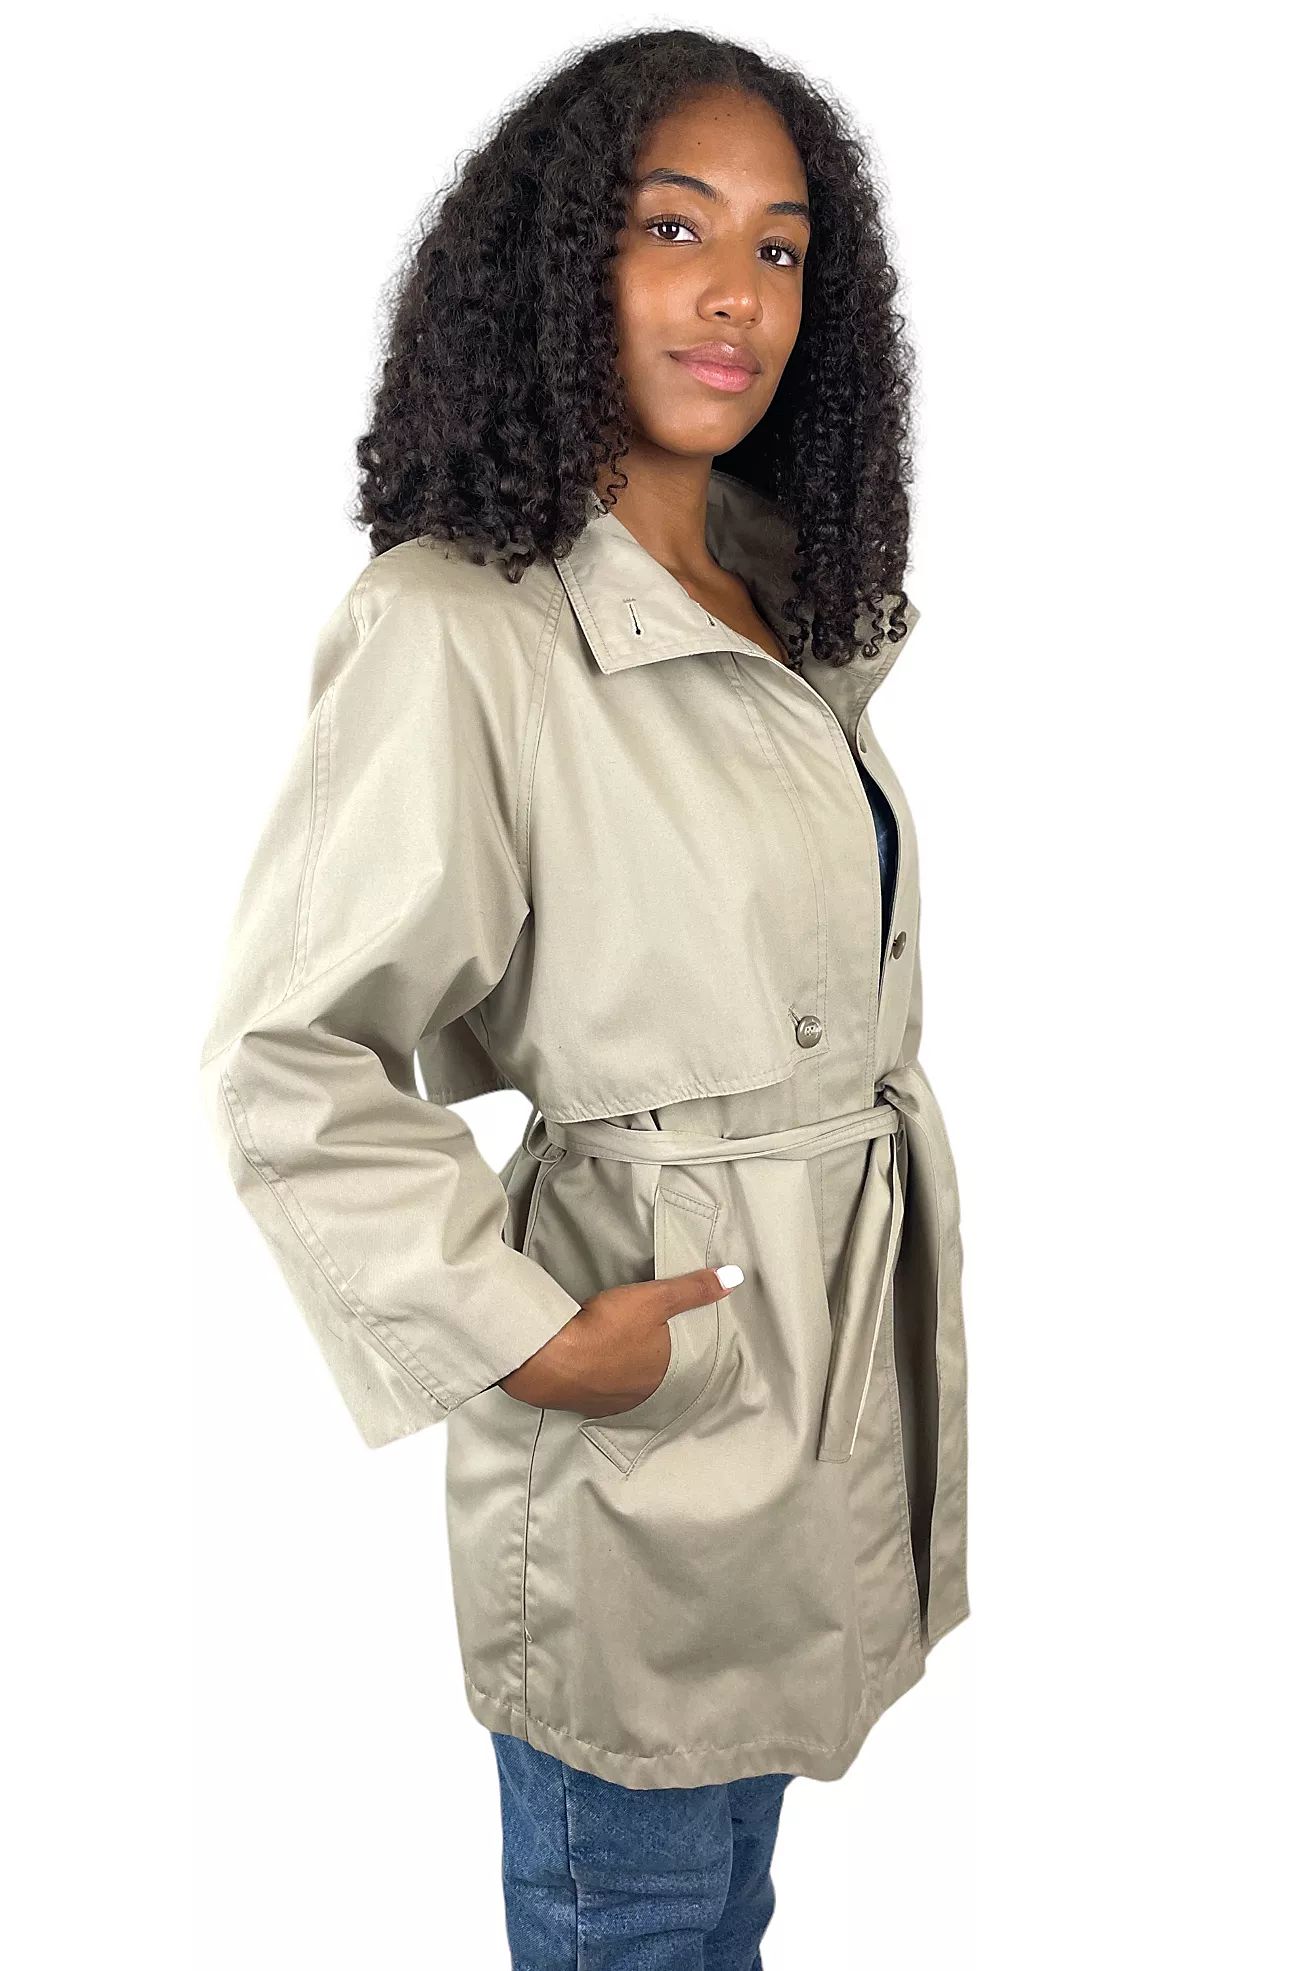 Vintage London Fog Khaki Trench Selected By Ankh By Racquel Vintage | Free People (Global - UK&FR Excluded)